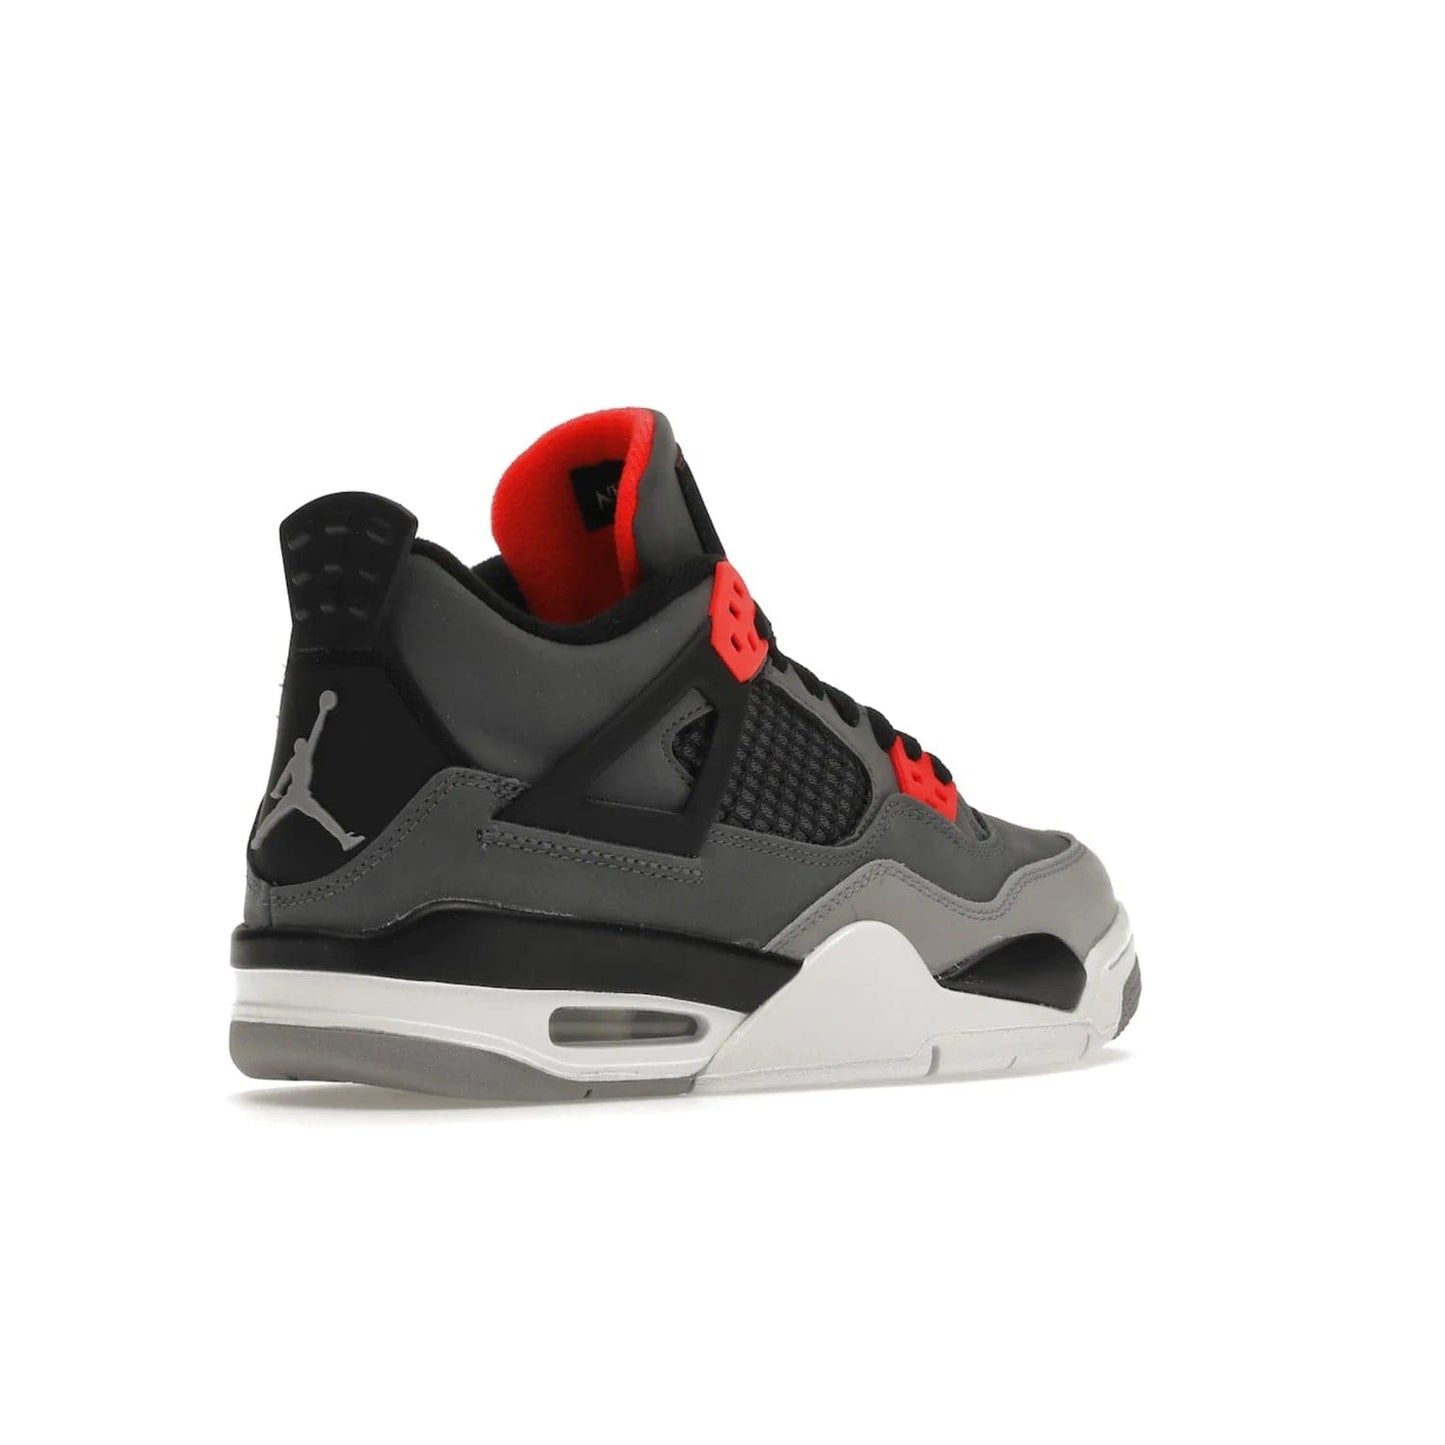 Jordan 4 Retro Infrared (GS) - Image 33 - Only at www.BallersClubKickz.com - Shop the Air Jordan 4 Retro Infrared (GS) for a classic silhouette with subtle yet bold features. Dark grey nubuck upper with lighter forefoot overlay, black accents, Infrared molded eyelets & woven tongue tag. Available June 2022.